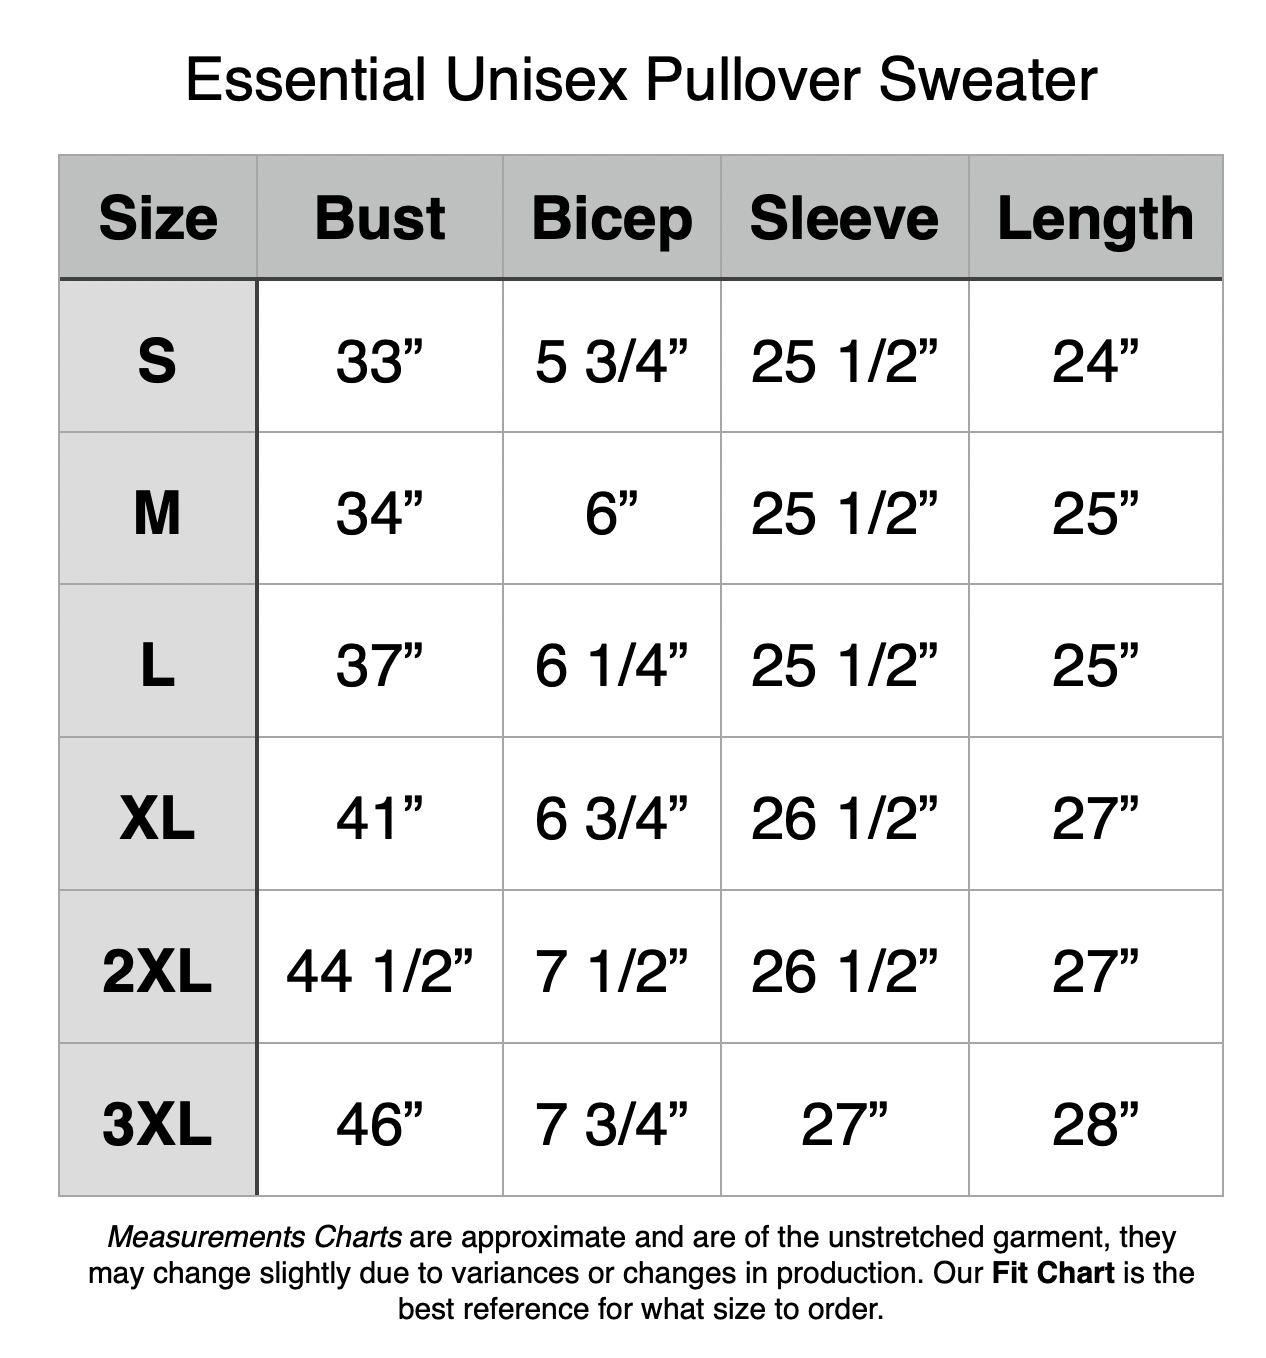 Essential Unisex Pullover Sweater: S - 33” Bust, 5.75” Bicep, 25.5” Sleeve, 24” Length. M - 34” Bust, 6” Bicep, 25.5” Sleeve, 25” Length. L - 37” Bust, 6.25” Bicep, 25.5” Sleeve, 25” Length. XL - 41” Bust, 6.75” Bicep, 26.5” Sleeve, 27” Length. 2XL - 44.5” Bust, 7.5” Bicep, 26.5” Sleeve, 27” Length. 3XL - 46” Bust, 7.75” Bicep, 27” Sleeve, 28” Length.